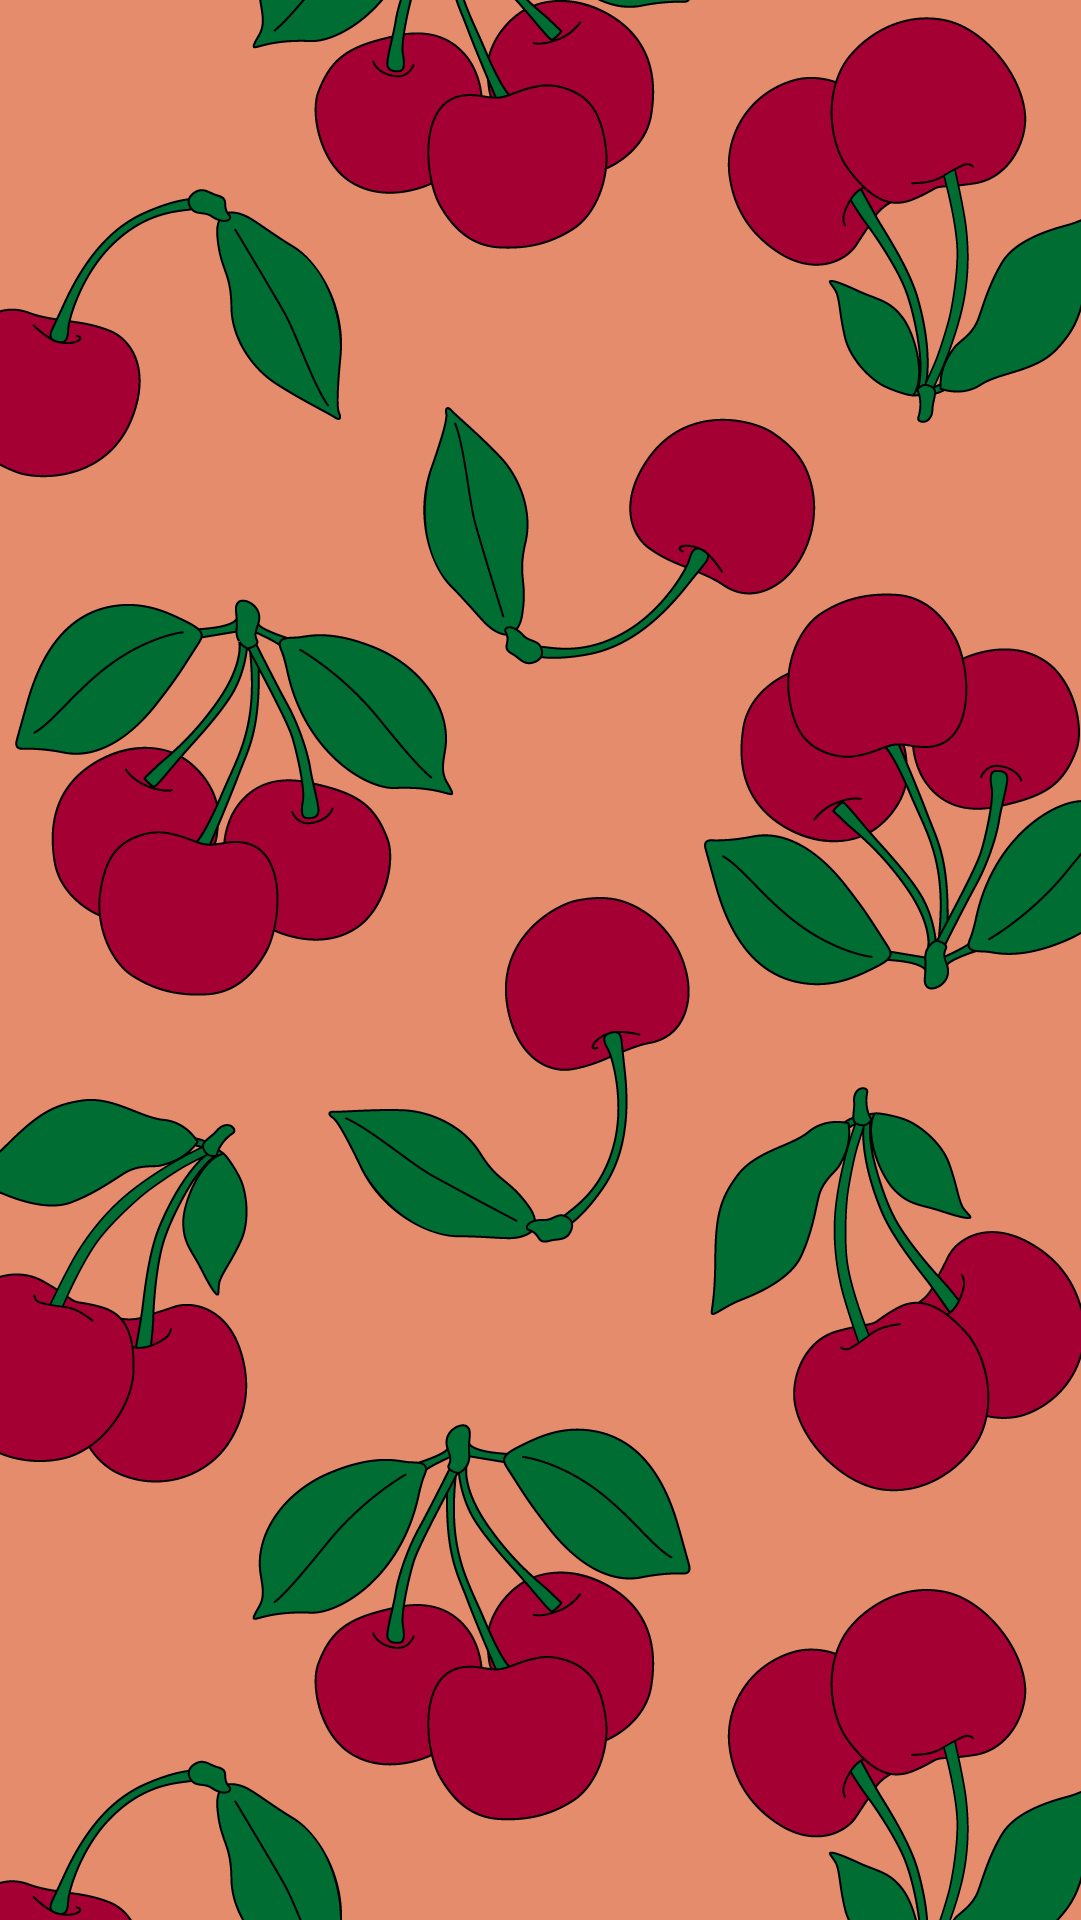 A phone wallpaper with a pattern of red cherries on a pink background - Fruit, strawberry